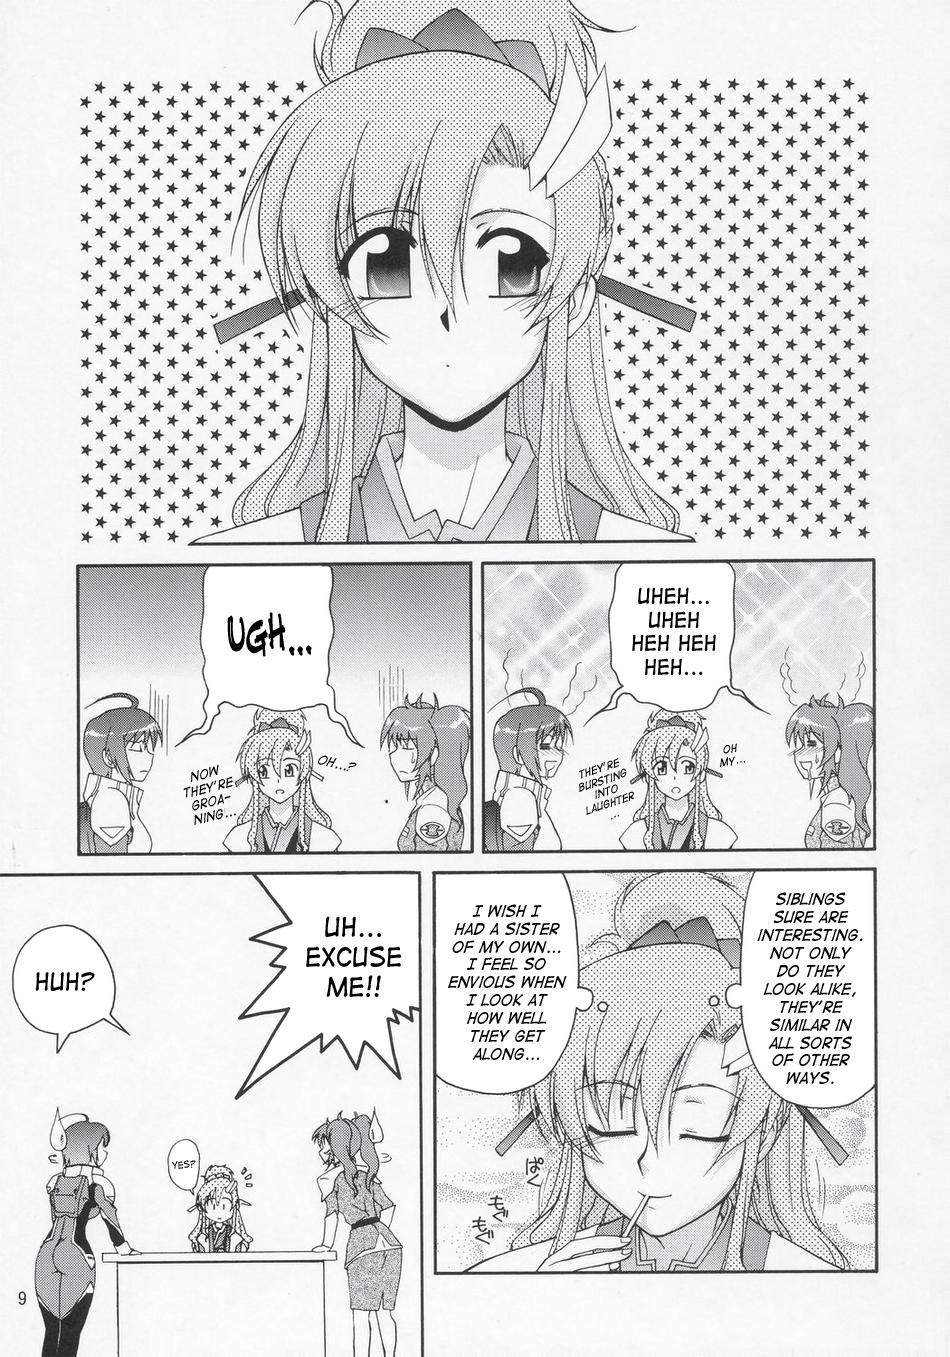 Hot Girls Fucking Thank You! Lacus End - Gundam seed destiny Pay - Page 8